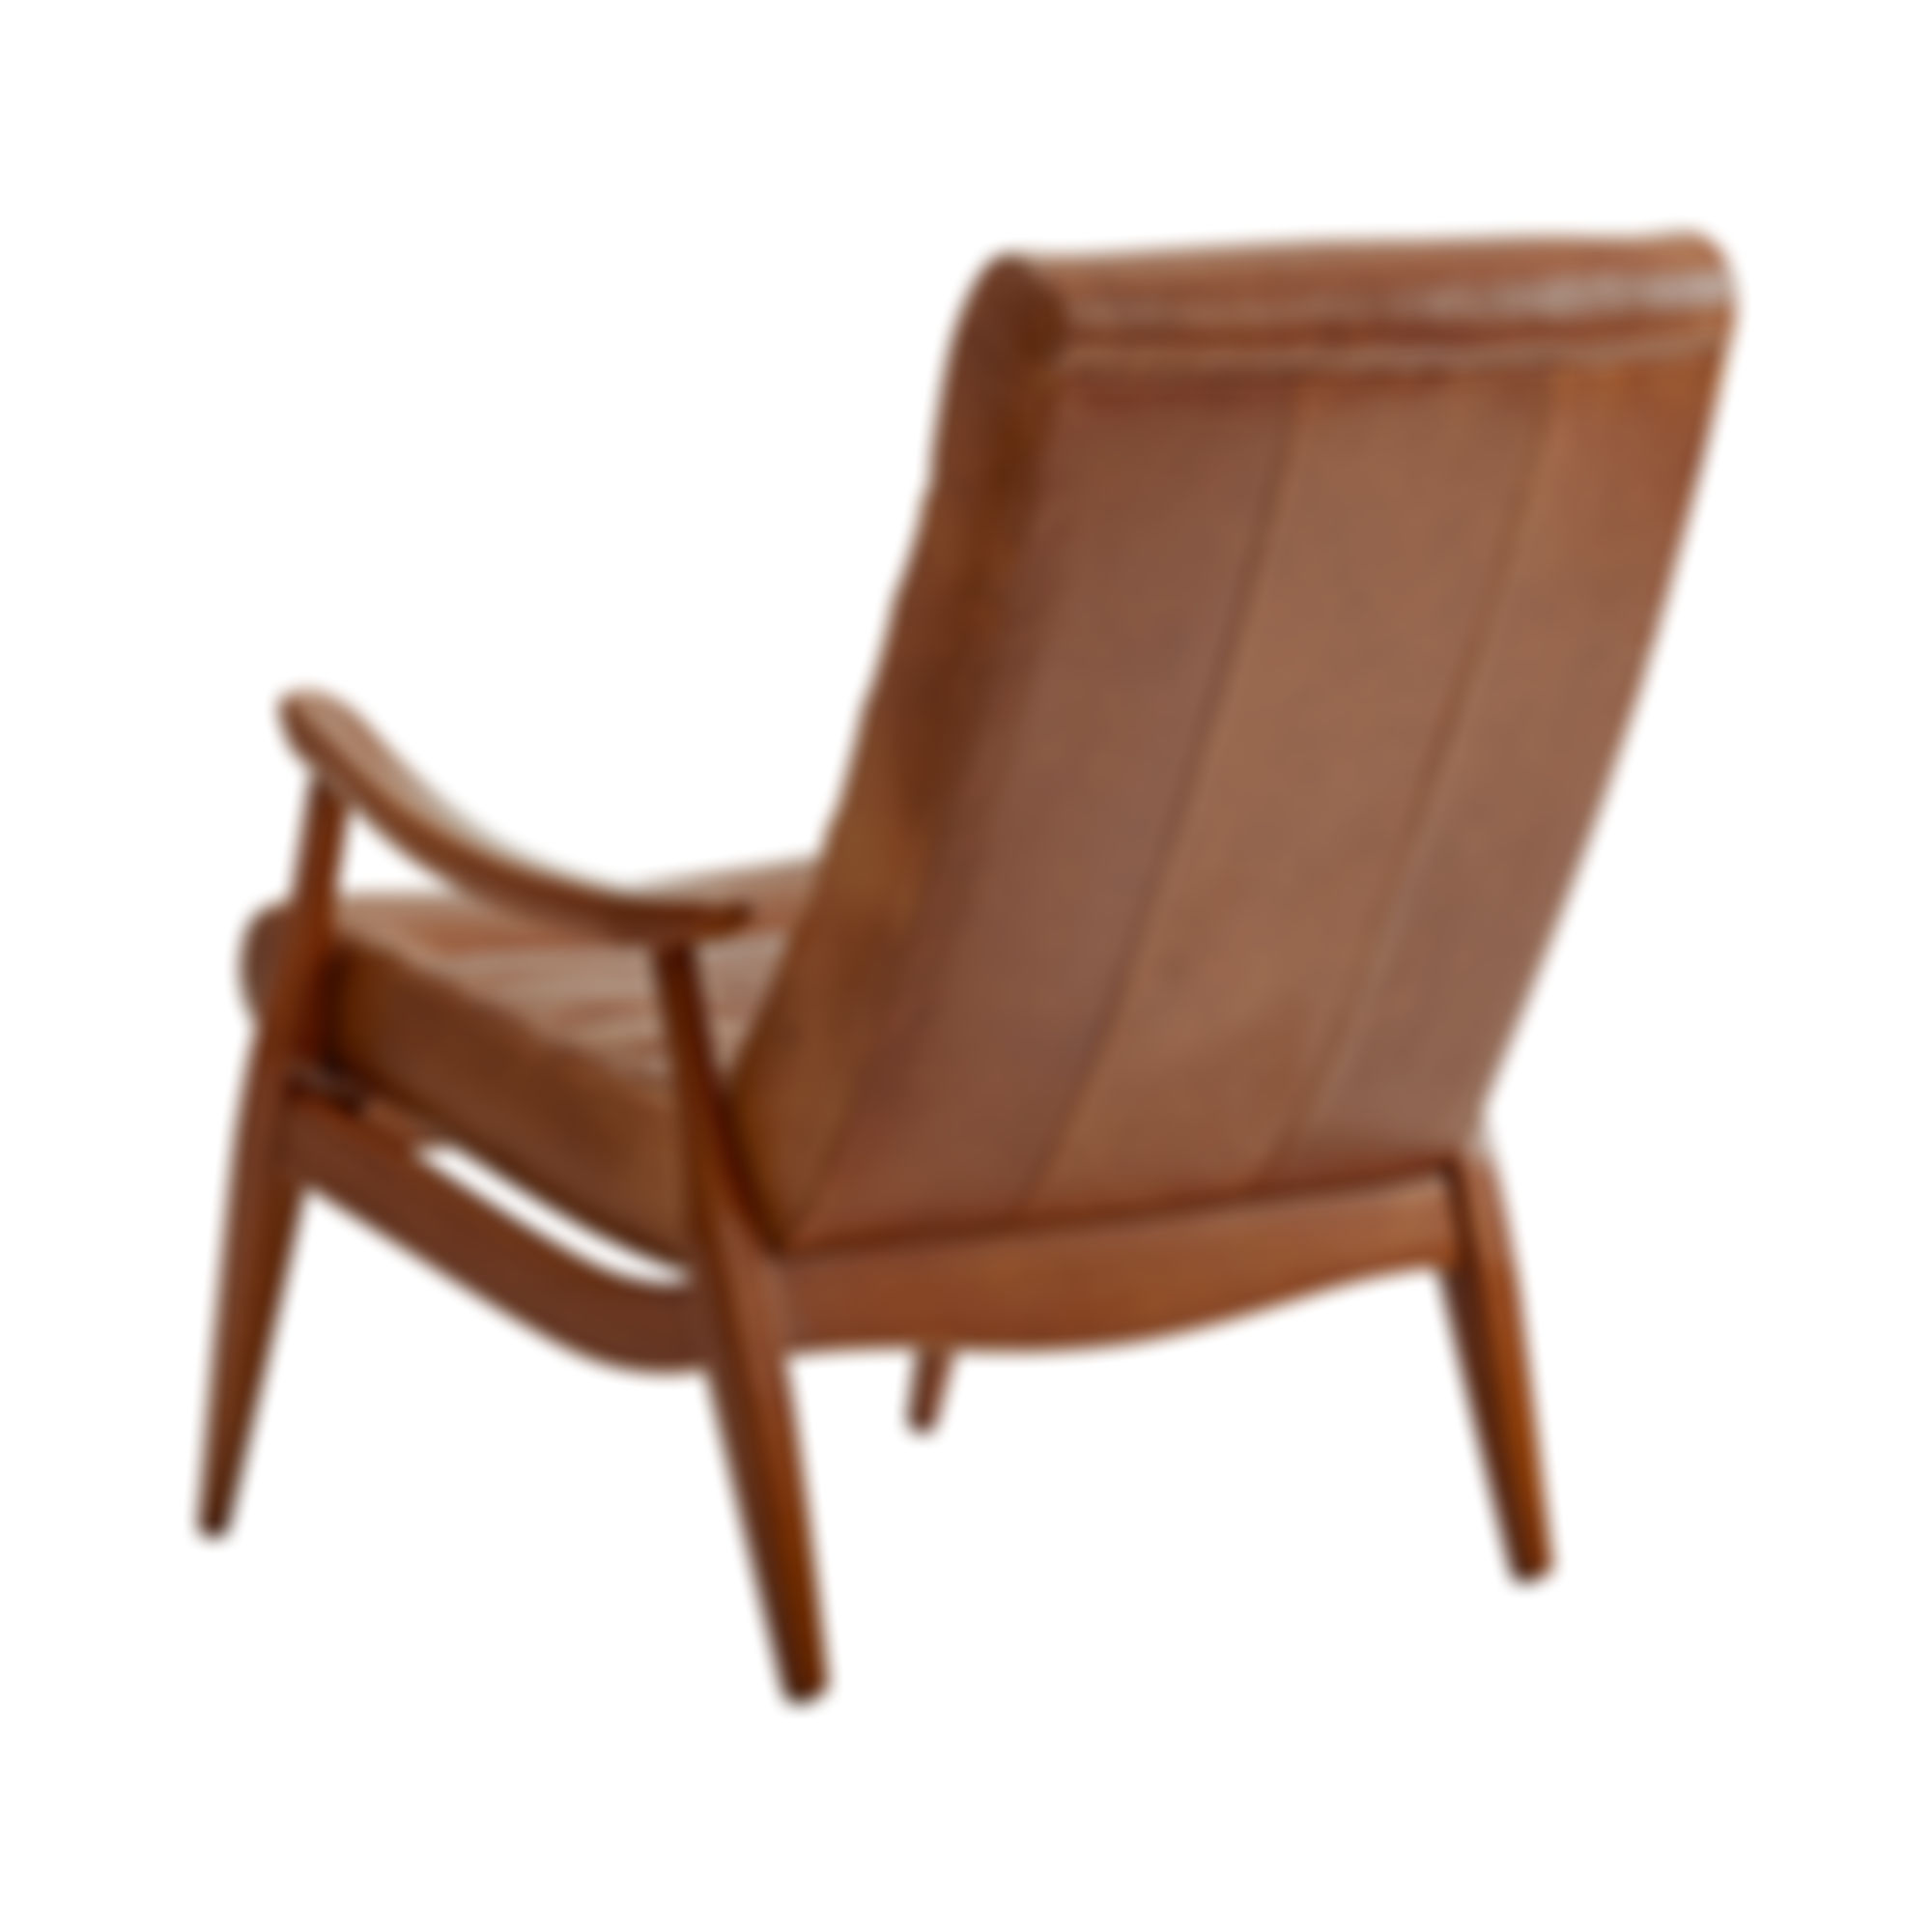 Hans Mid Century Modern Leather Chair, Klaussner Leather Chair